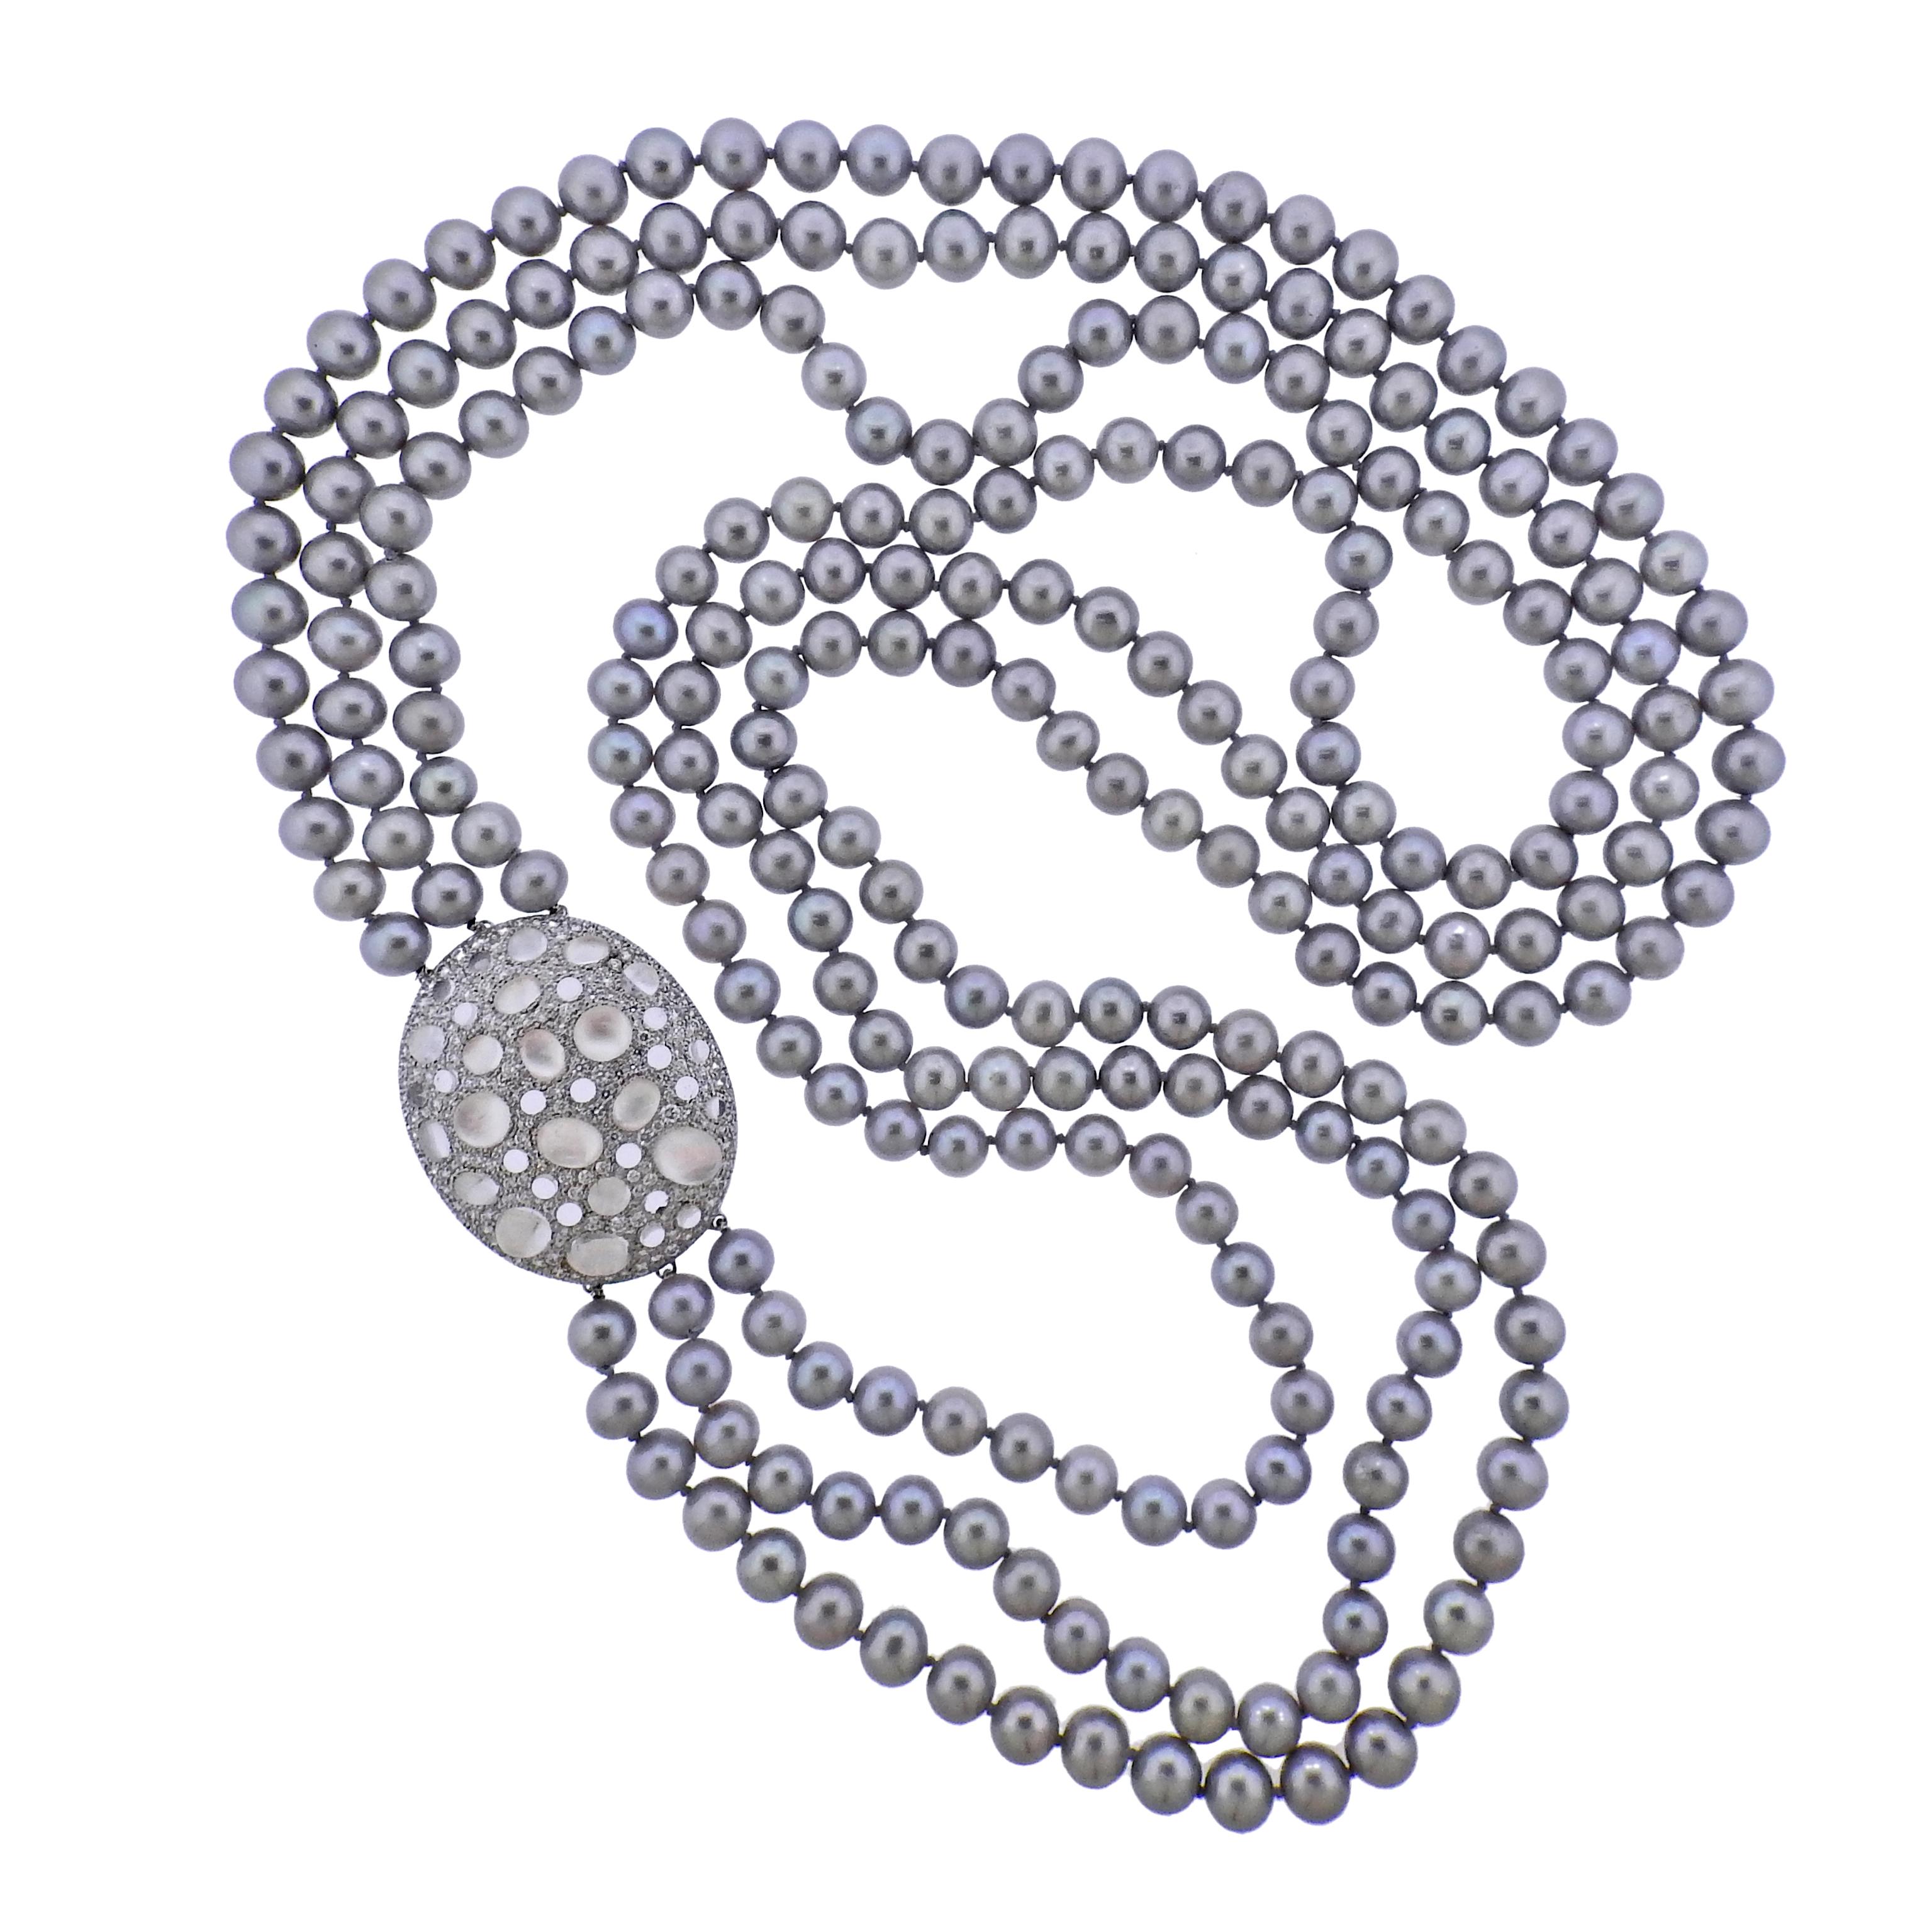 Long three strand grey pearl necklace, crafted by Ivanka Trump, featuring oval 35mm x 45mm 18k white gold clasp, set with approximately 4.65ctw in VS/G diamonds and crystals. Necklace set with 8mm - 8.7m grey pearls. Clasp does not open or close,